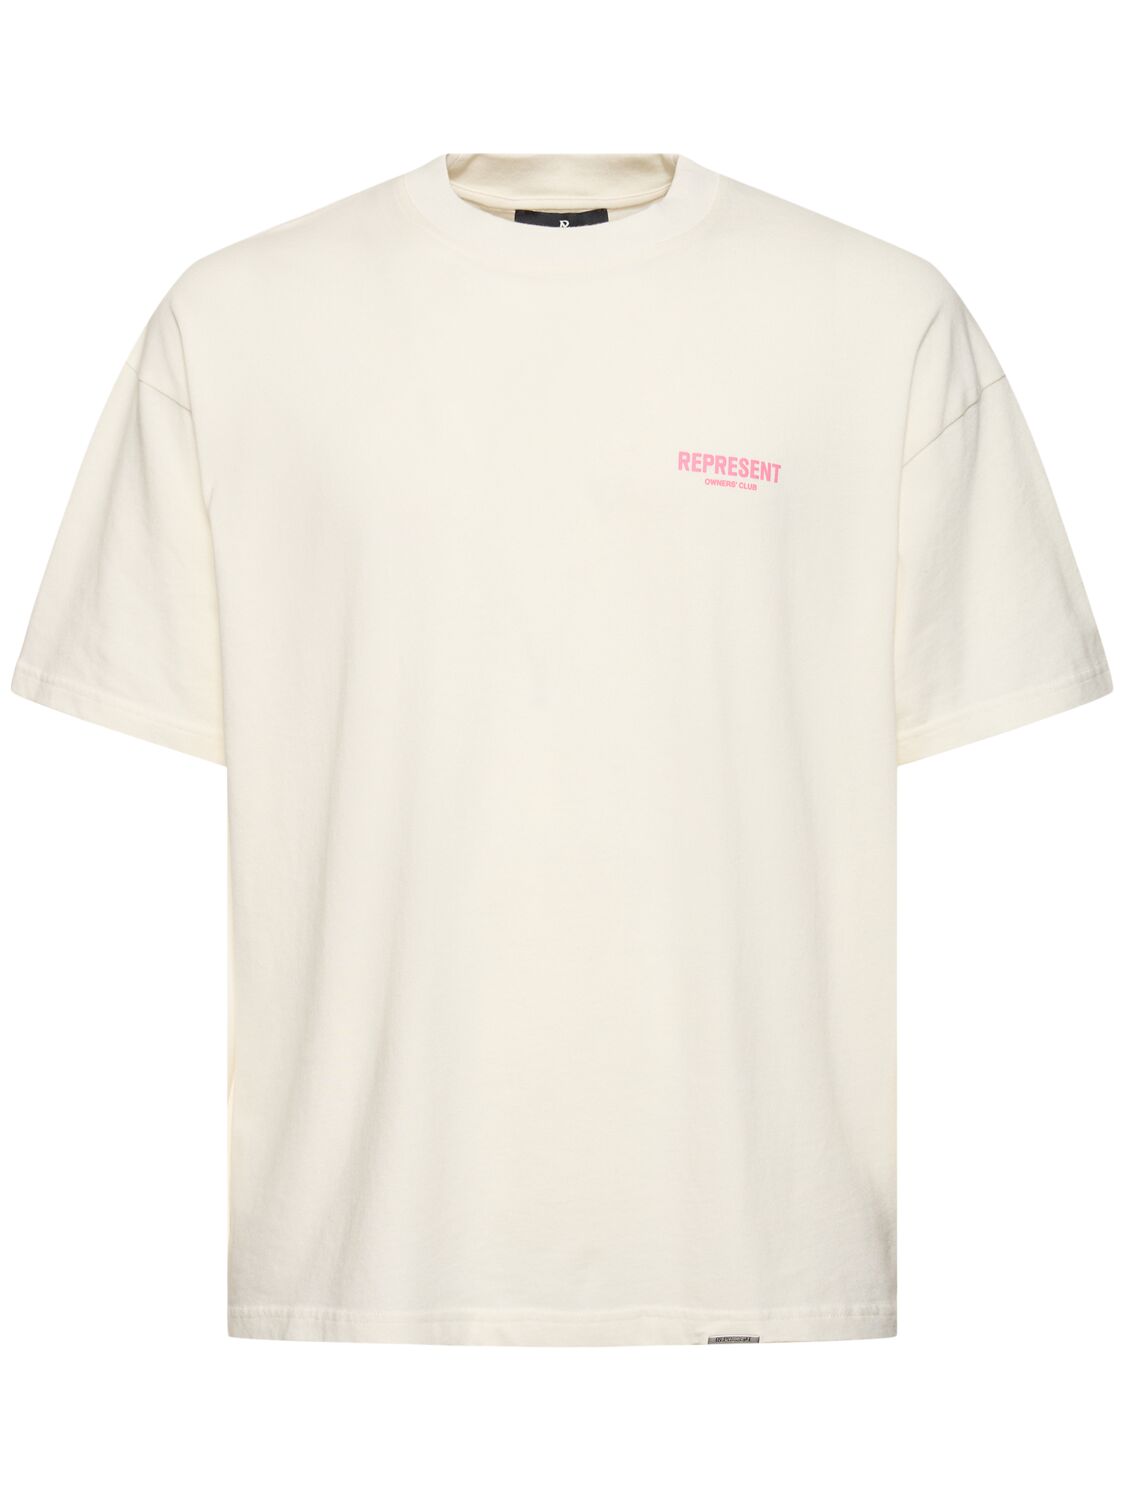 Represent Owners Club Logo Cotton T-shirt In Multi